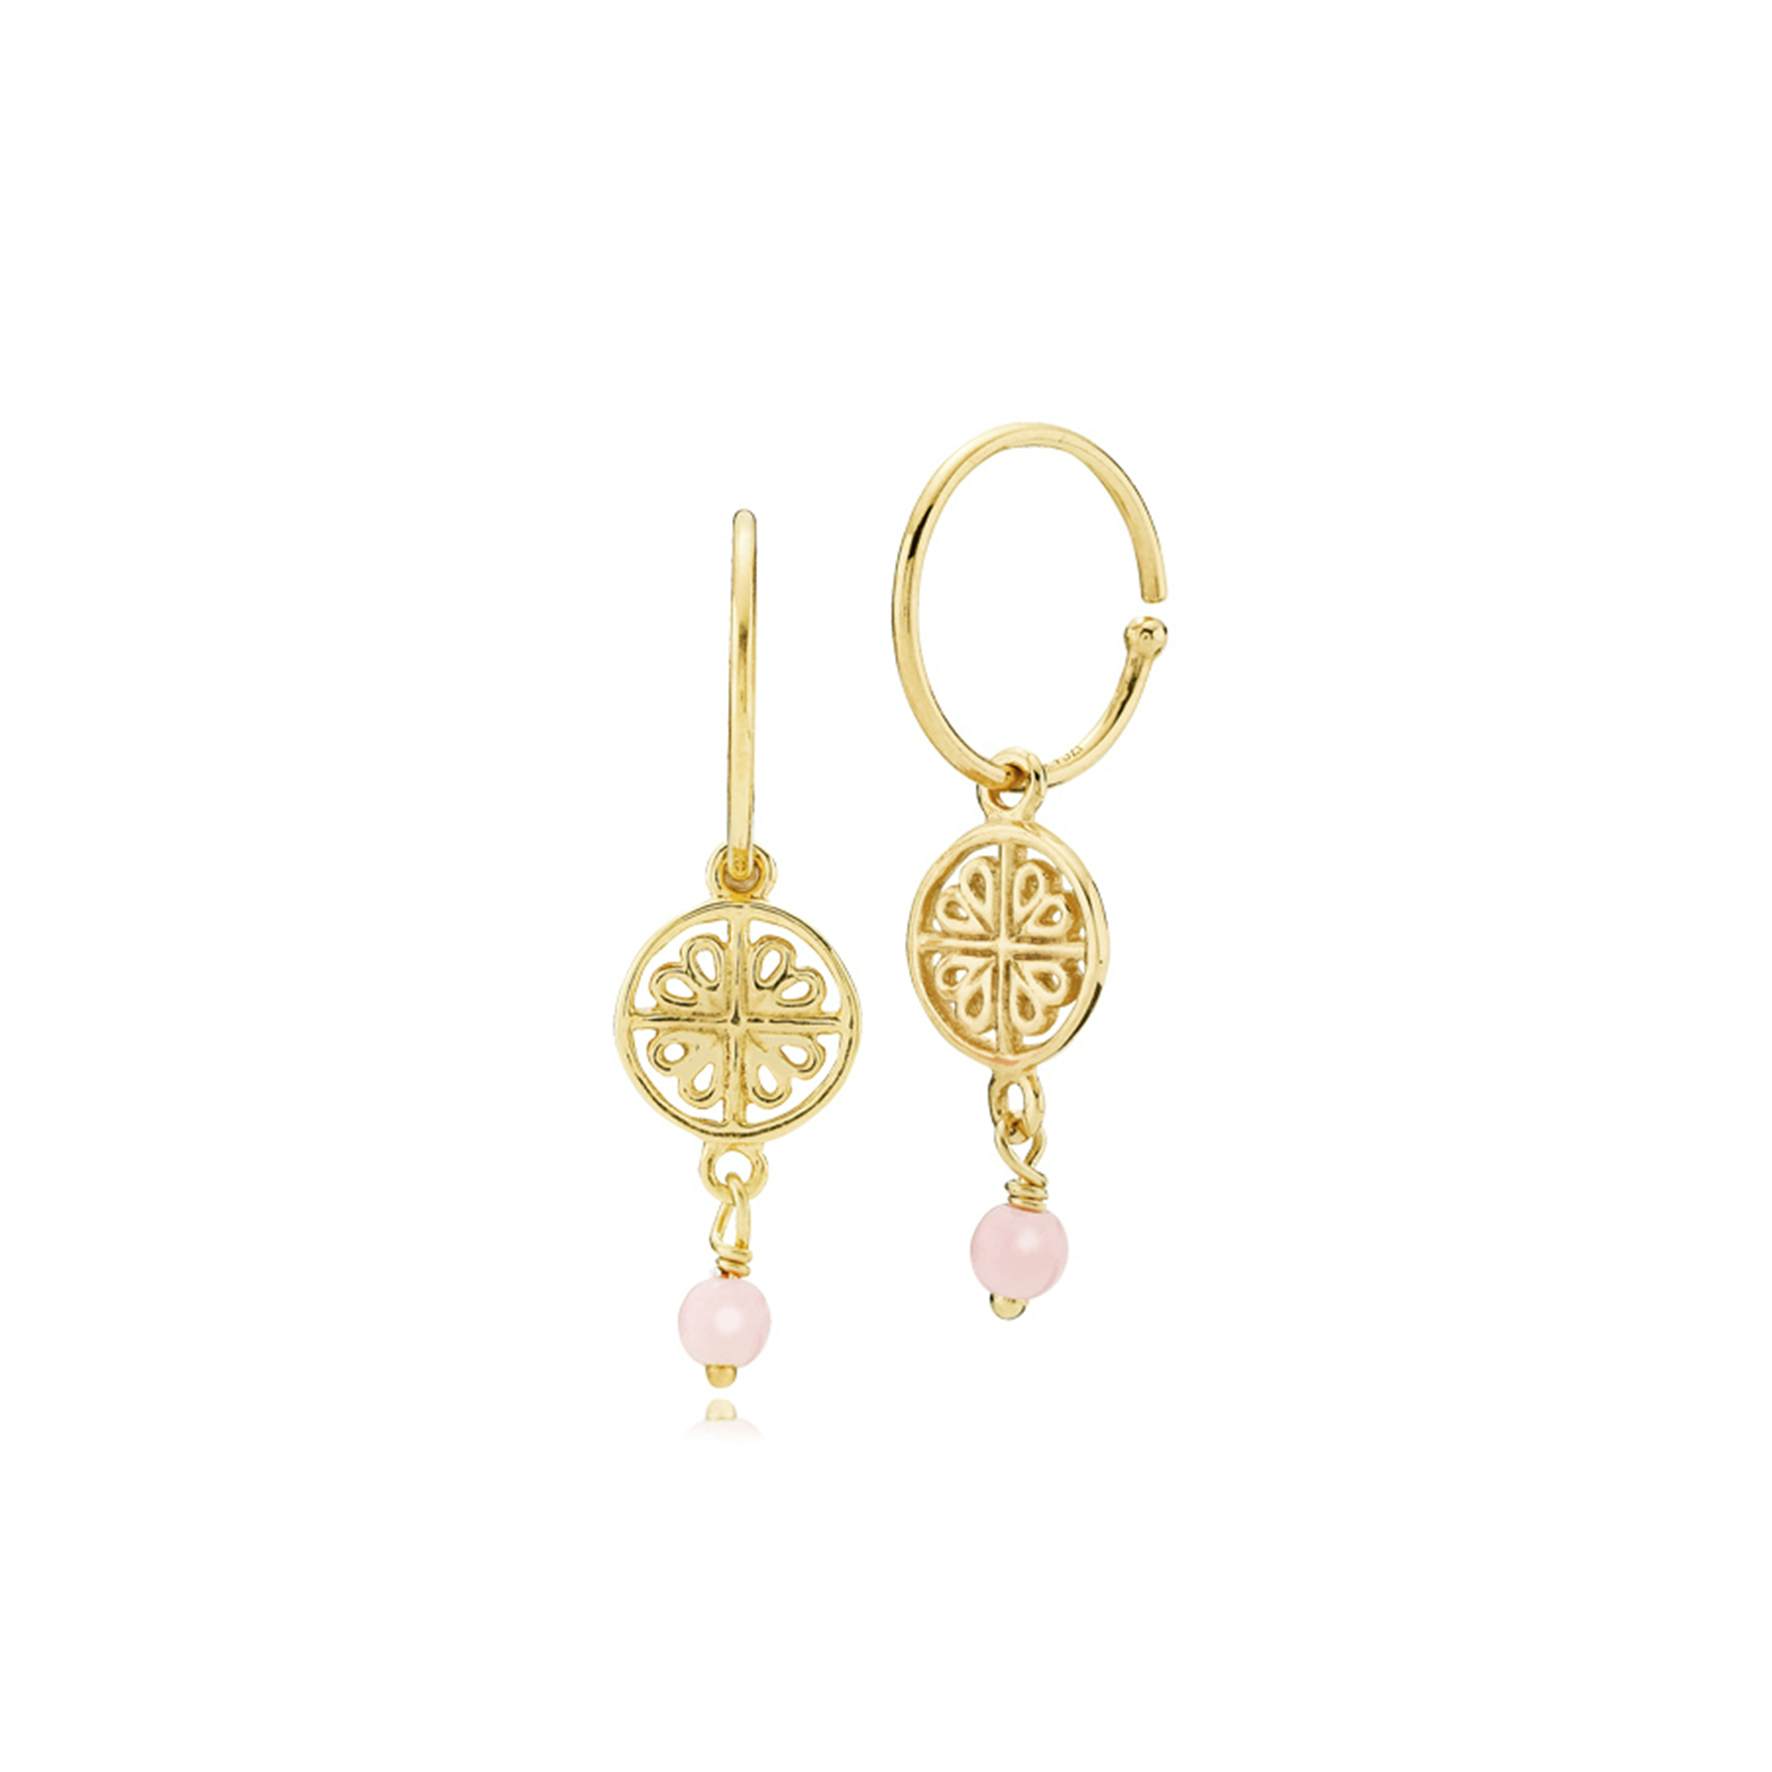 Balance Creol Earrings Pink from Sistie in Goldplated-Silver Sterling 925